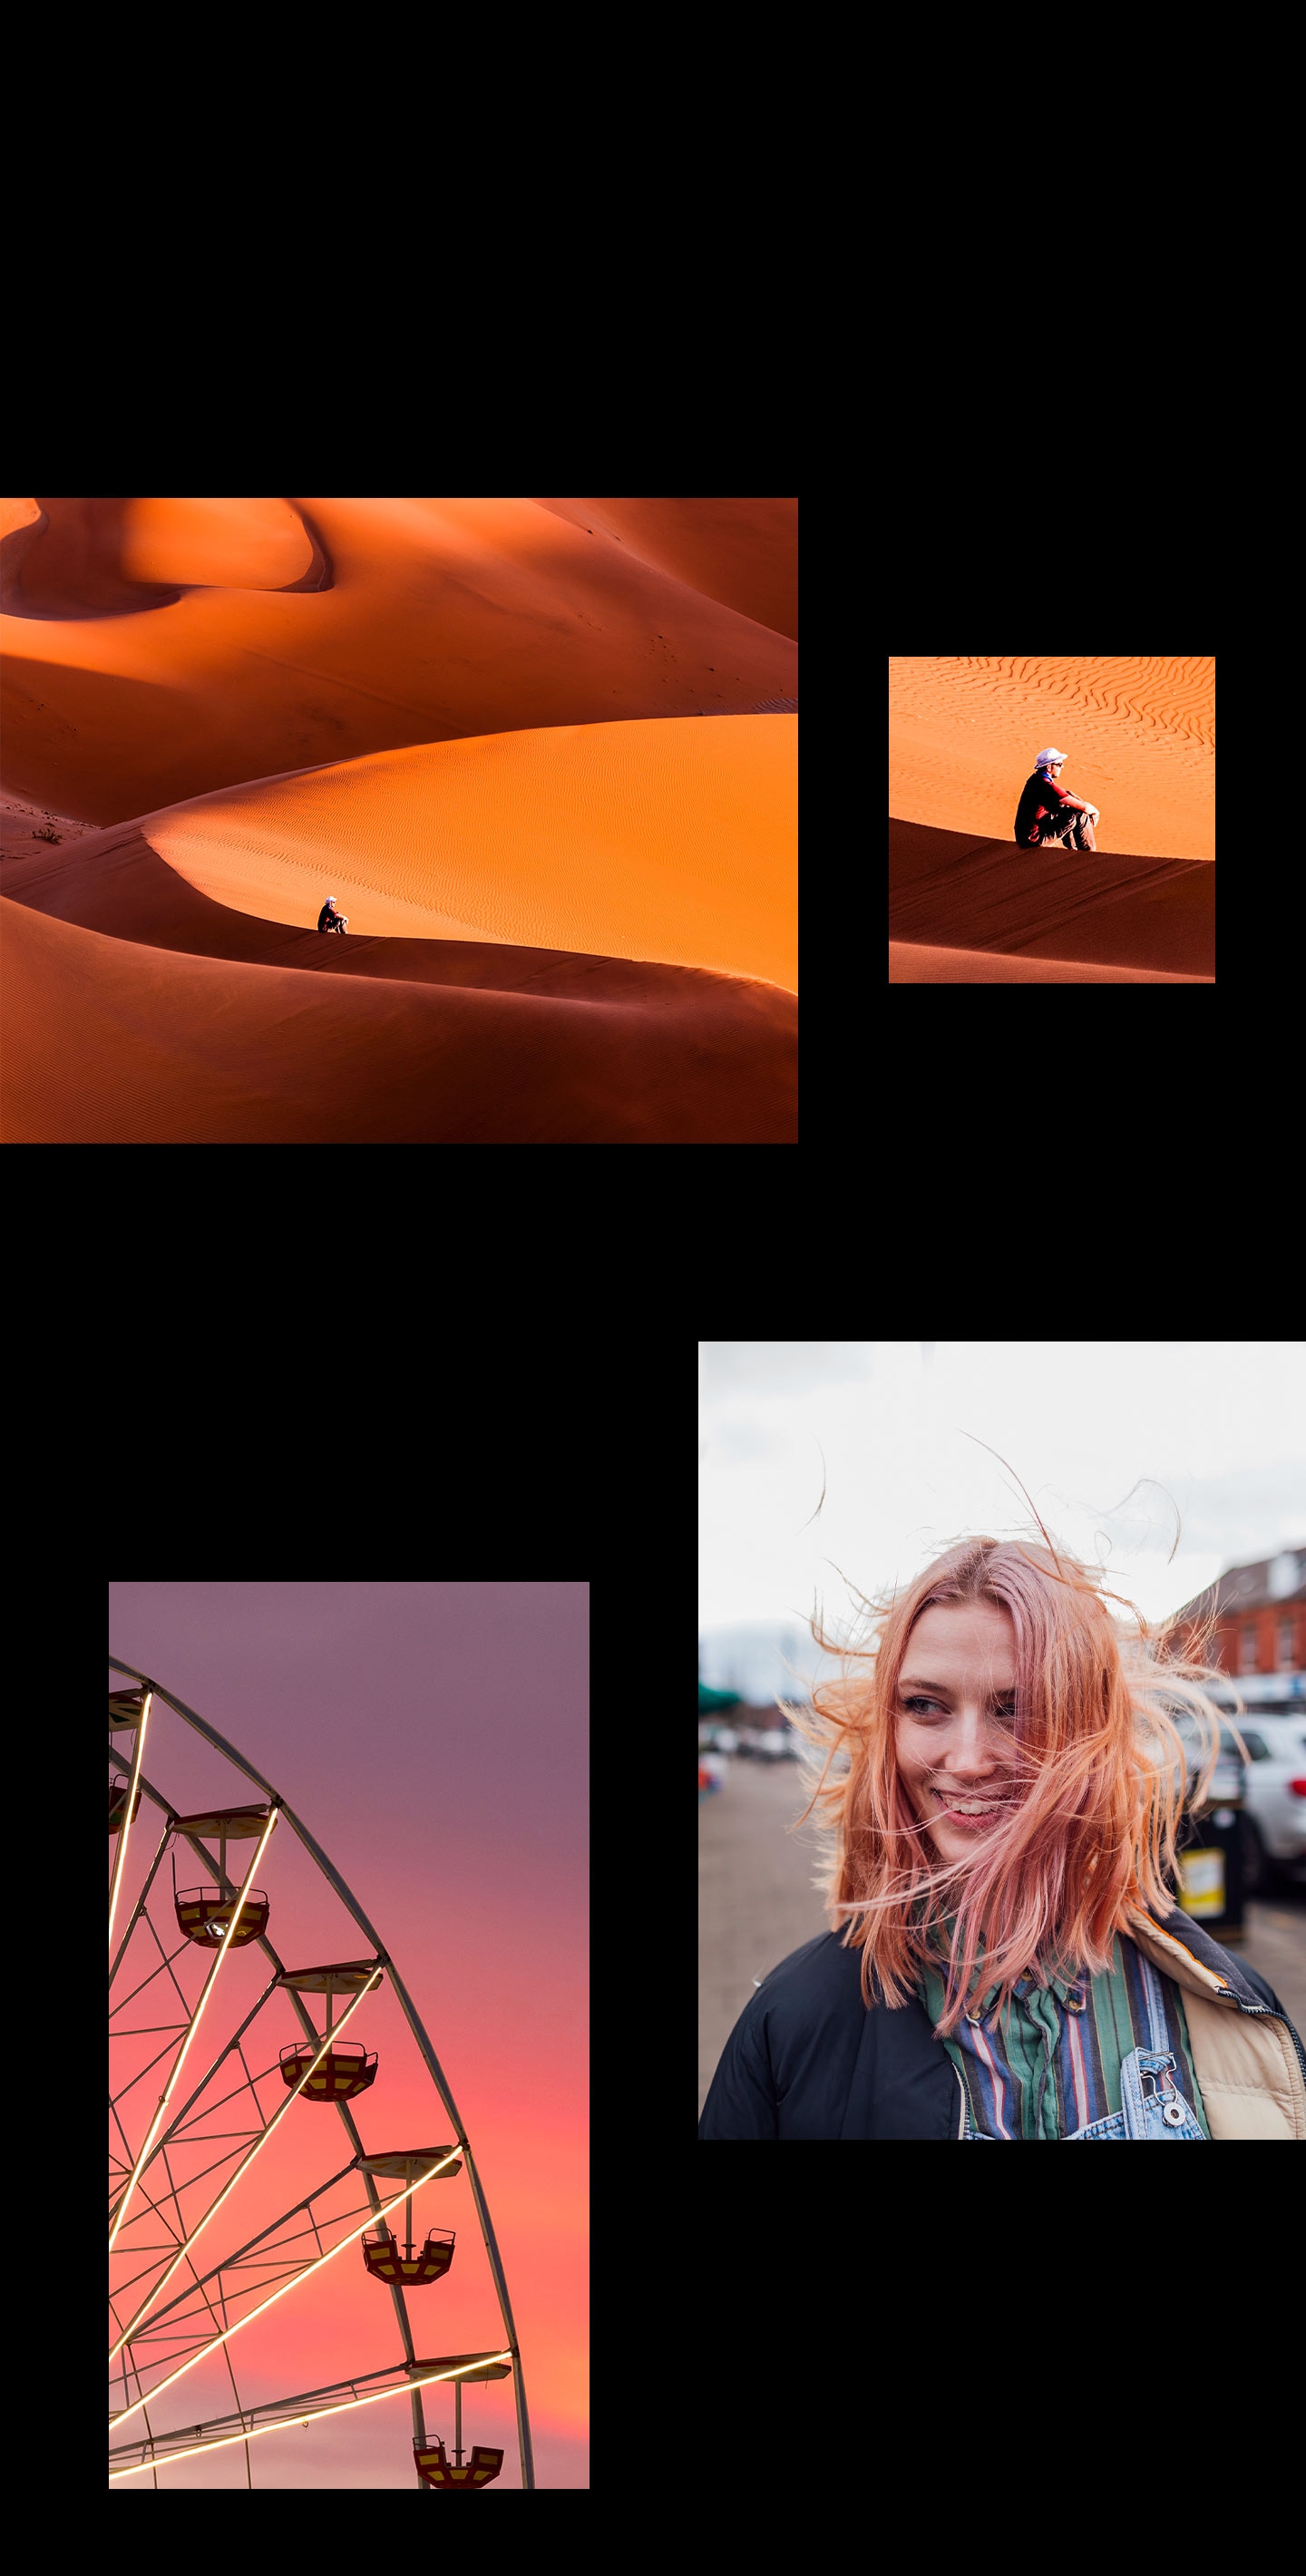 The following five shots are shown: A vast desert landscape with a man sitting on top of a dune, a zoom-in shot of the man sitting on top of a dune, part of a ferris wheel against a sunset background, a portrait of a woman, smiling, with red hair, and a long blonde haired skateboarder riding in a park by the forest.